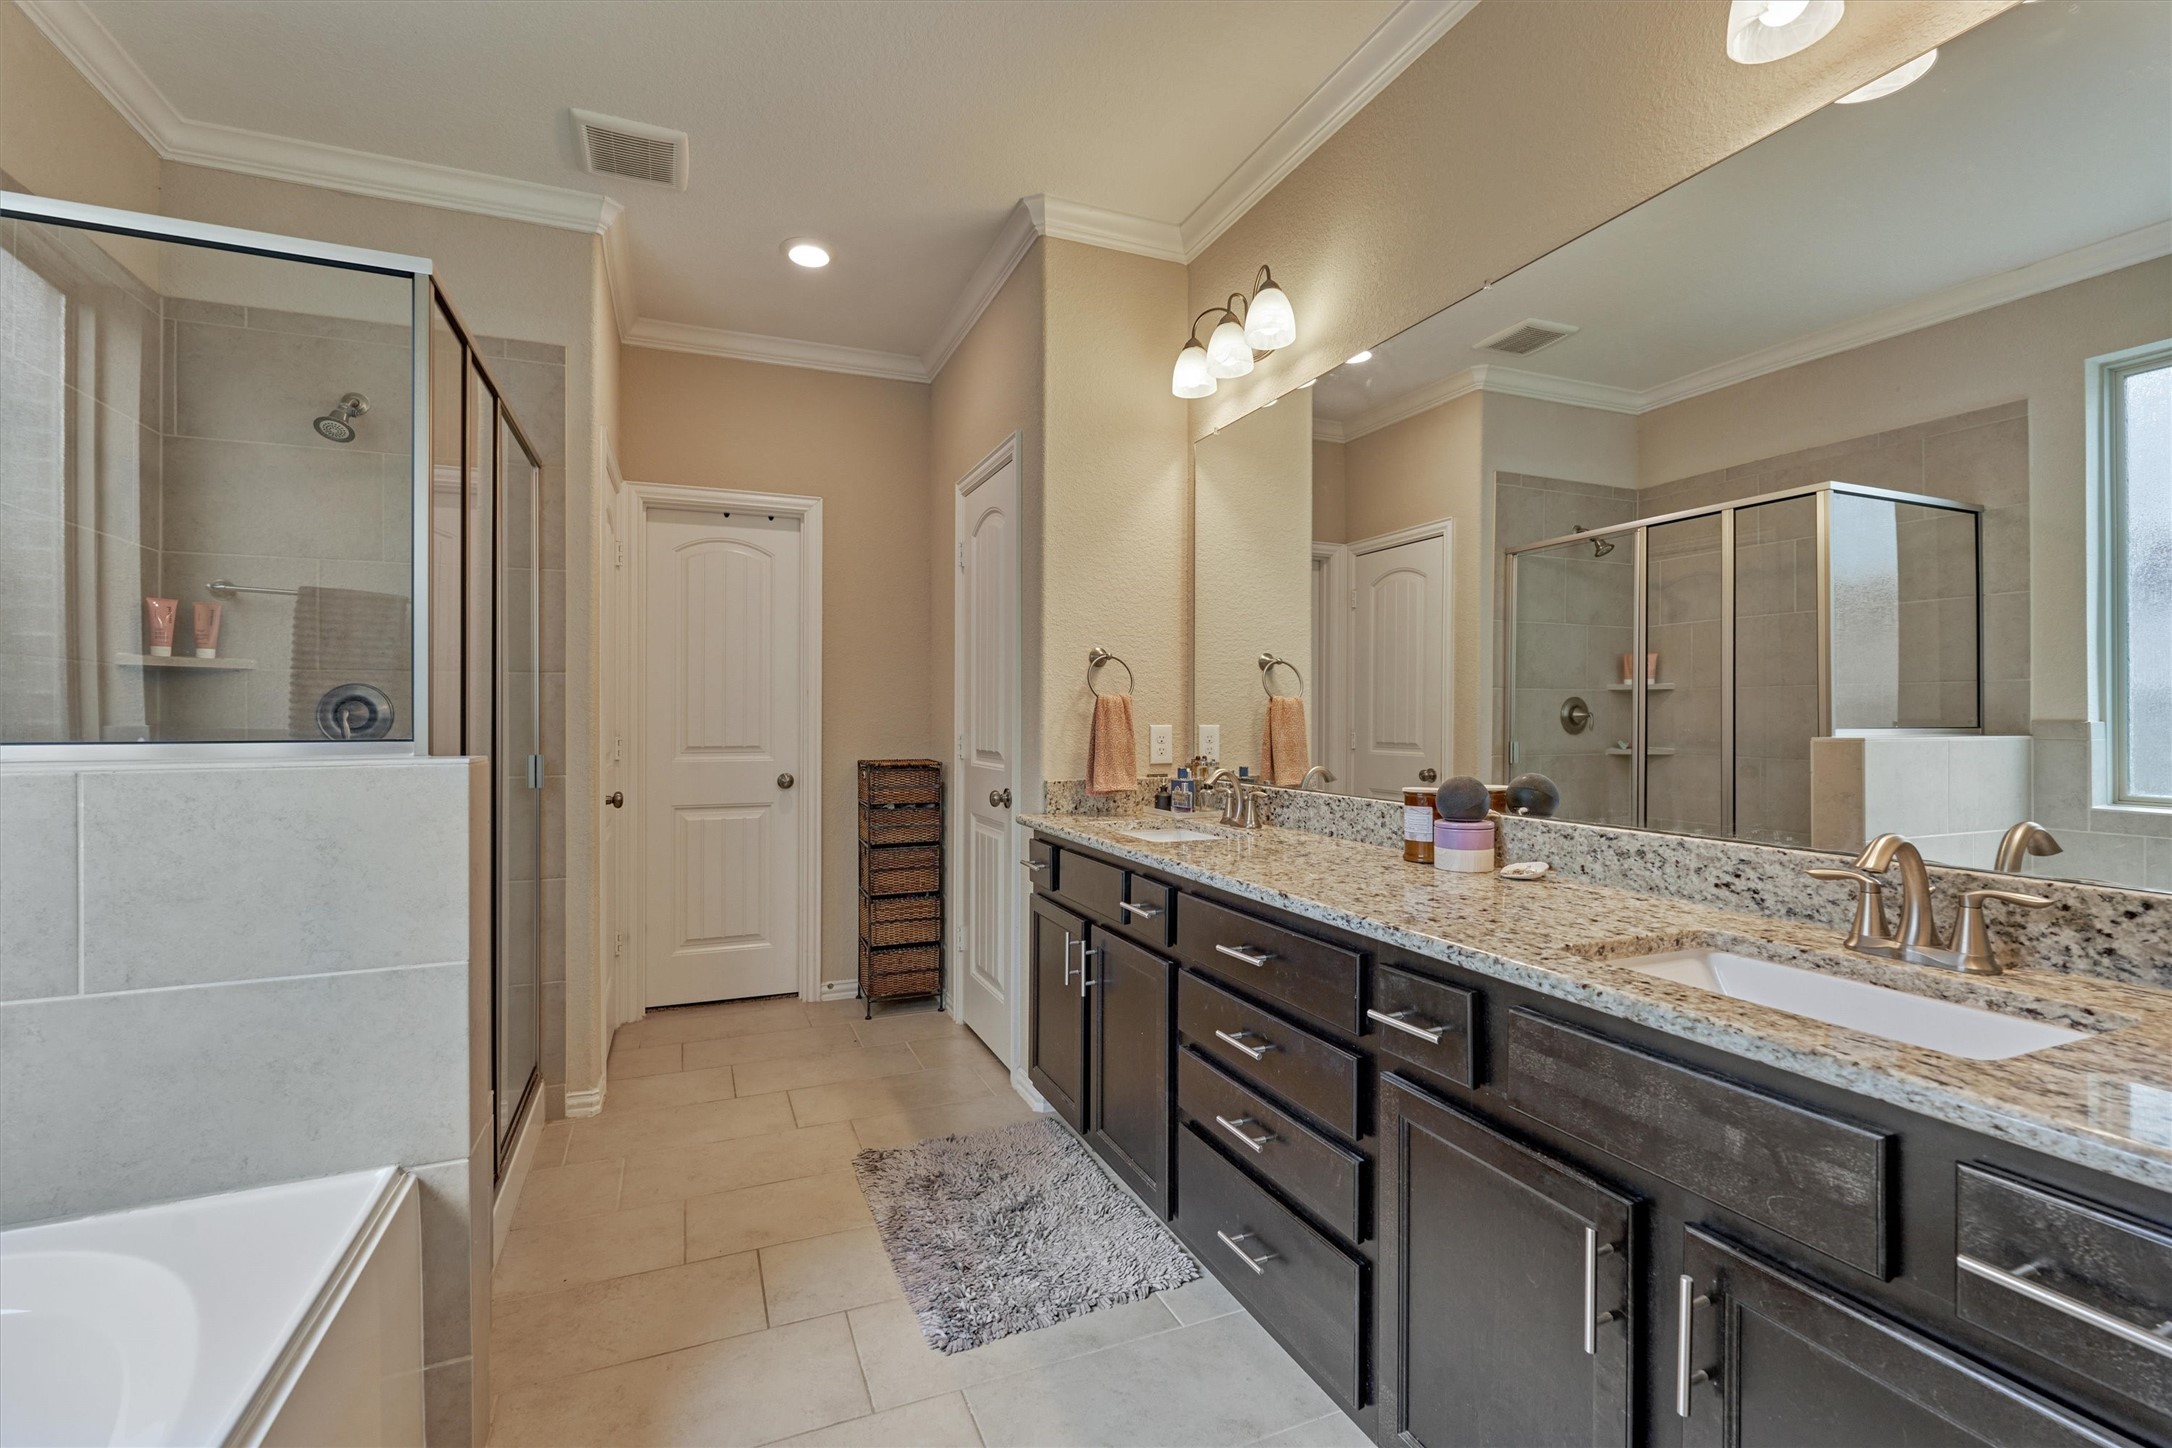 The primary bathroom is very spacious and enjoys neutral colors, ceramic tile flooring, and a large walk-in closet.